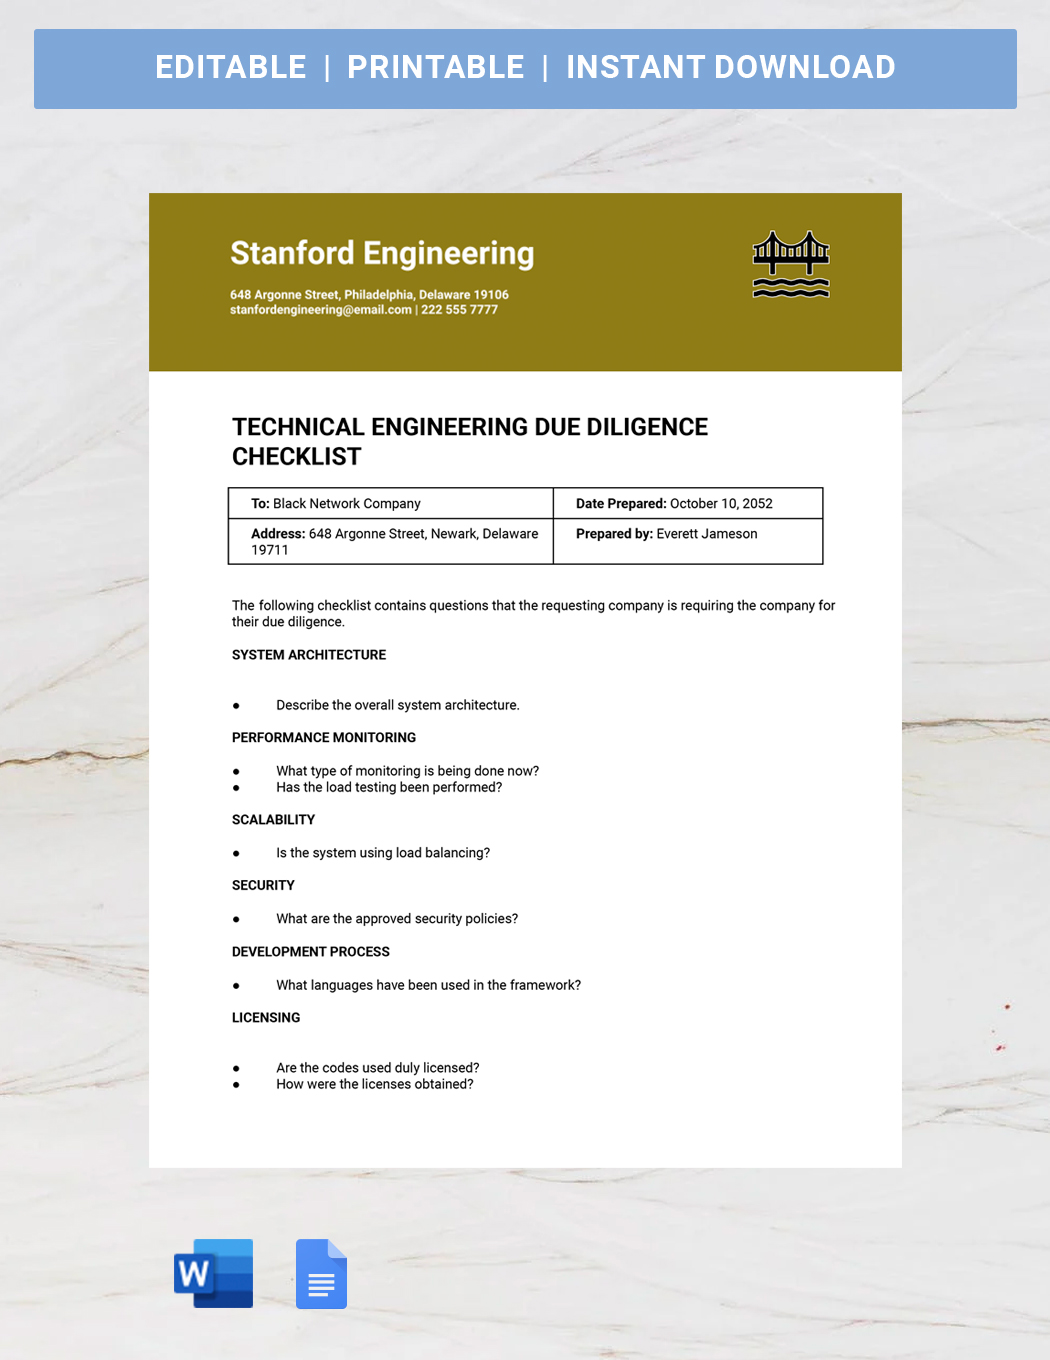 Technical Engineering Due Diligence Checklist Template